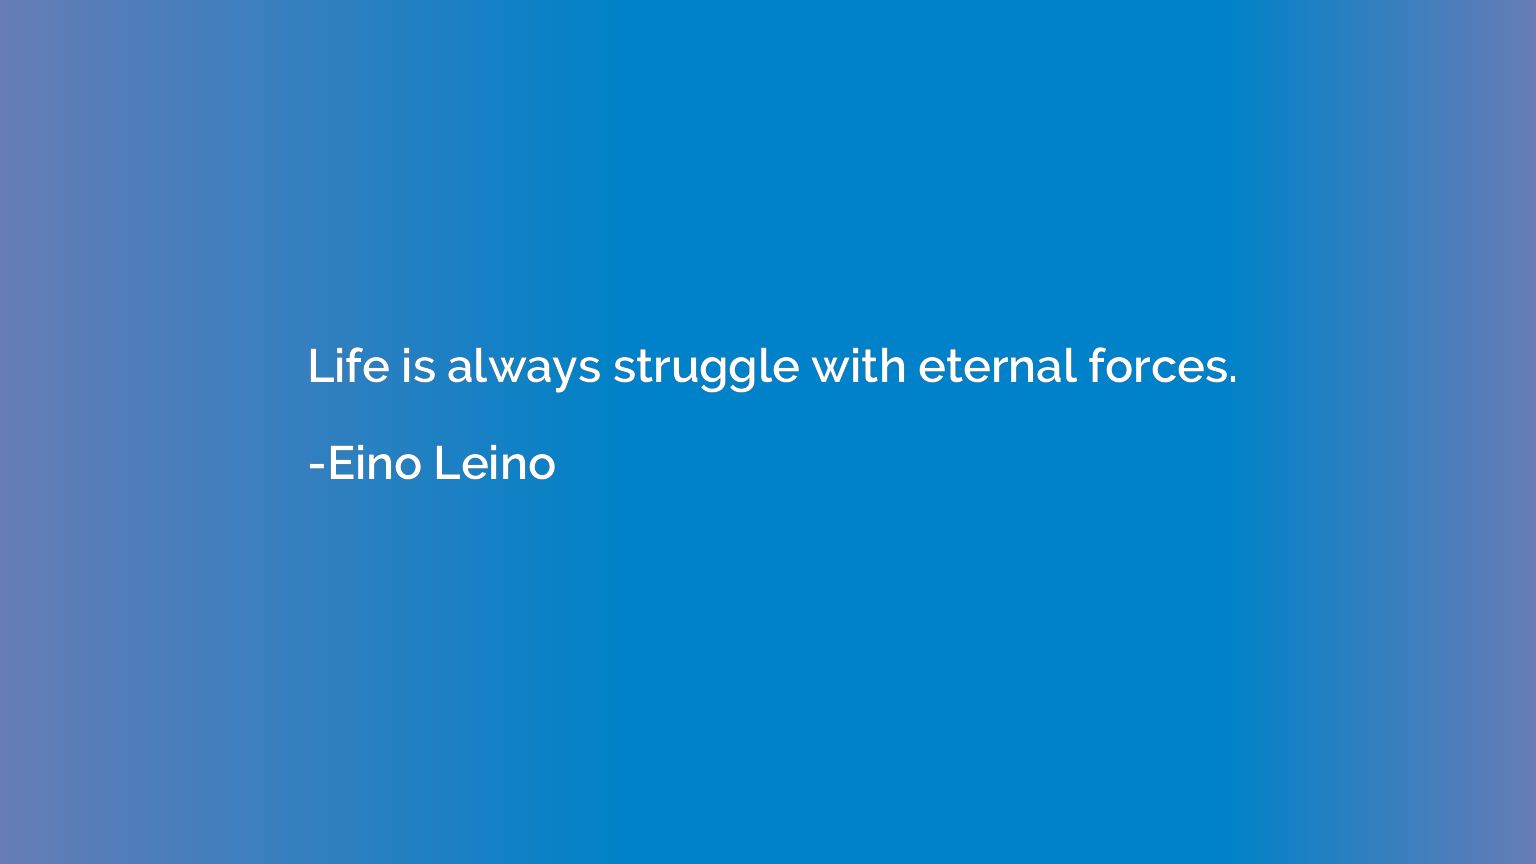 Life is always struggle with eternal forces.